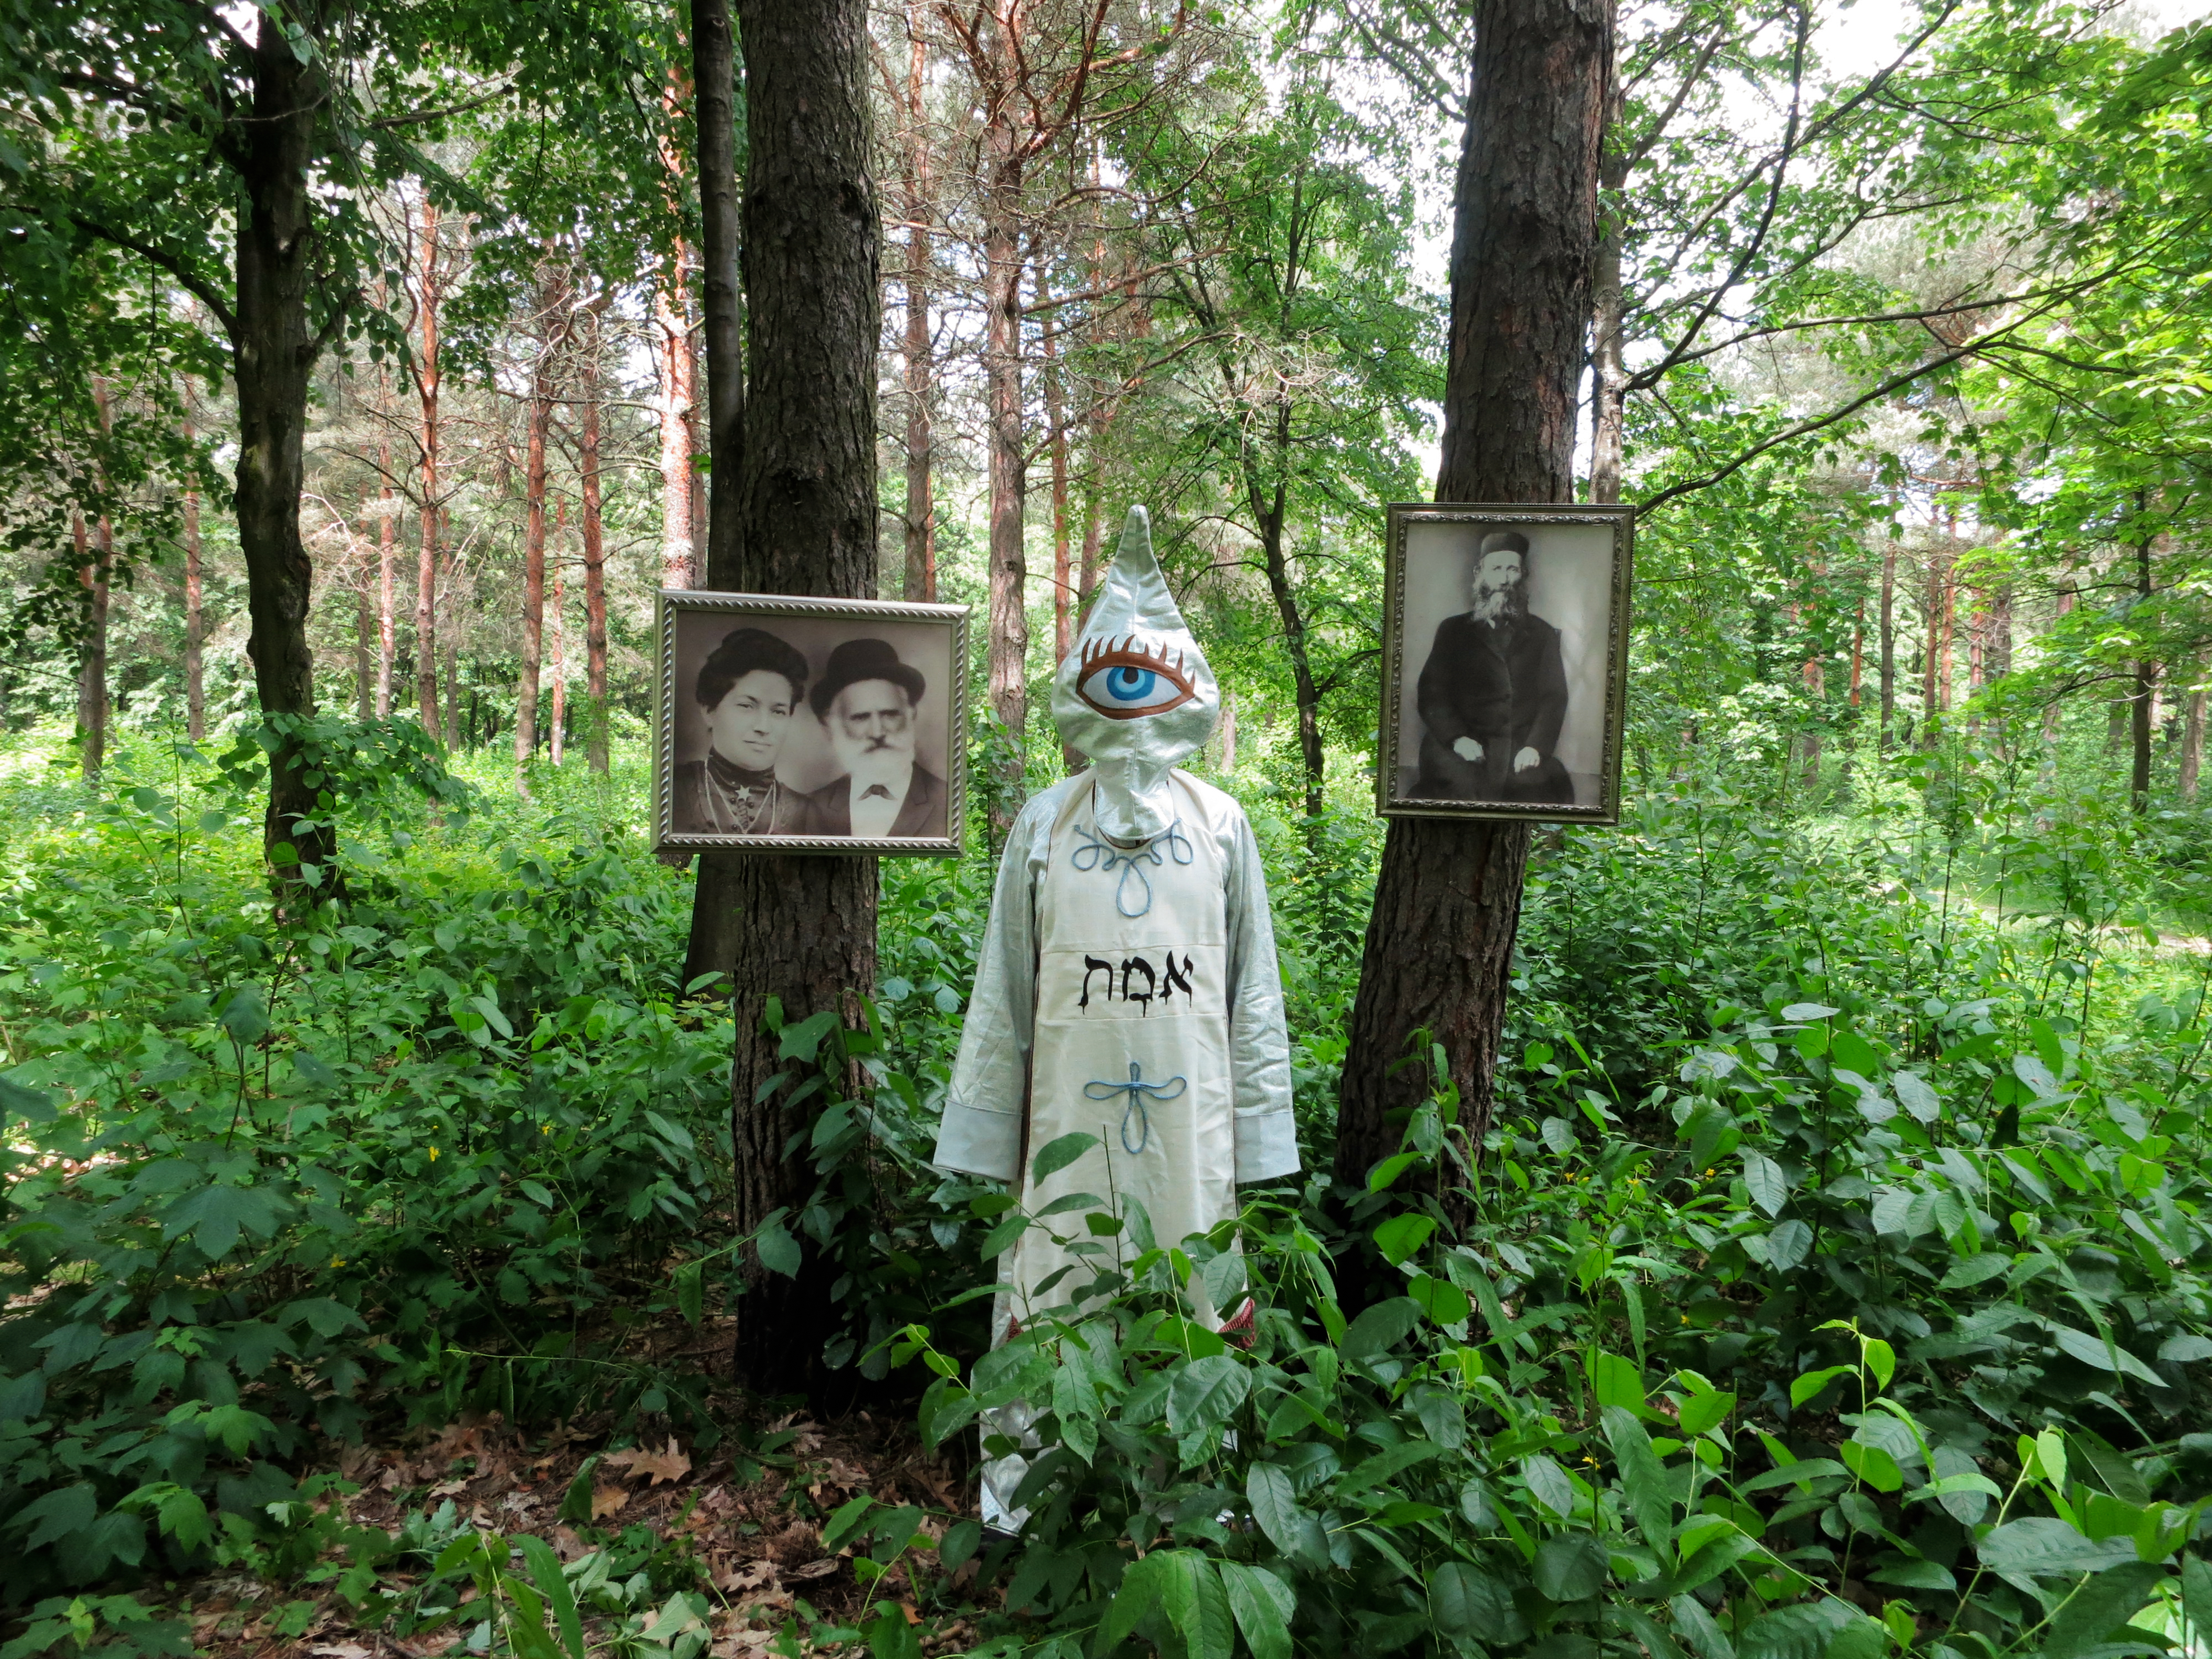 Image: Gary in the woods in Poland/Ukraine where his father hid and fought.